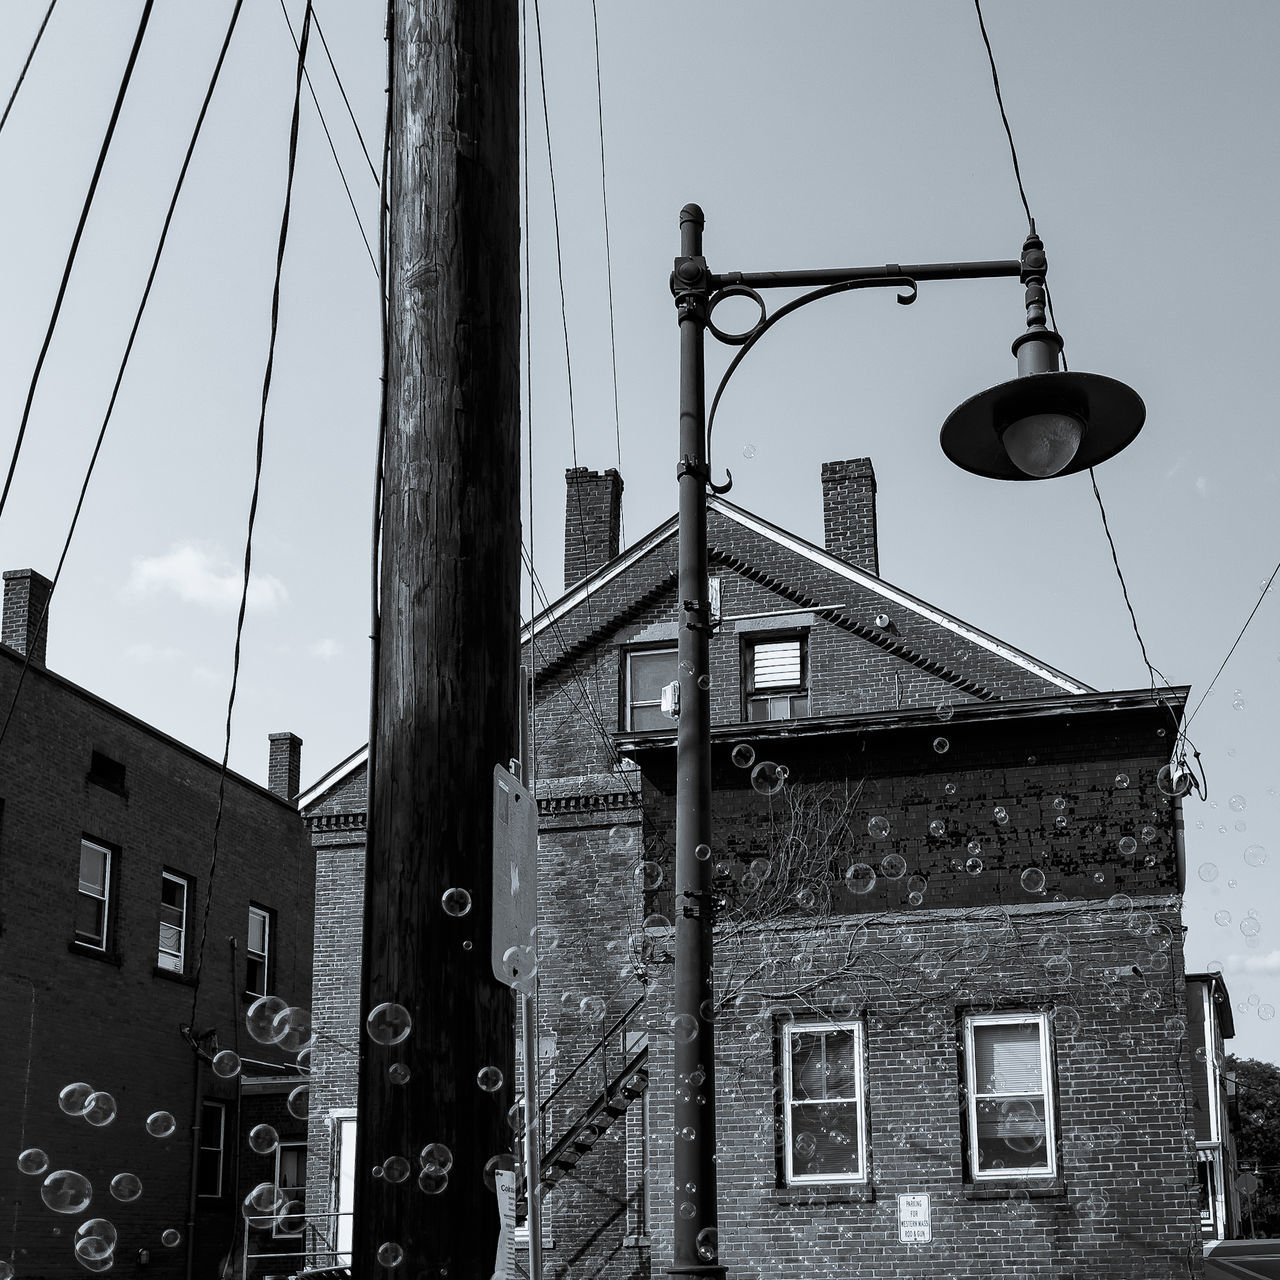 architecture, built structure, building exterior, black and white, black, sky, monochrome, monochrome photography, cable, street, urban area, white, low angle view, no people, building, street light, city, electricity, road, nature, day, clear sky, house, residential district, outdoors, lighting, communication, technology, window, sign